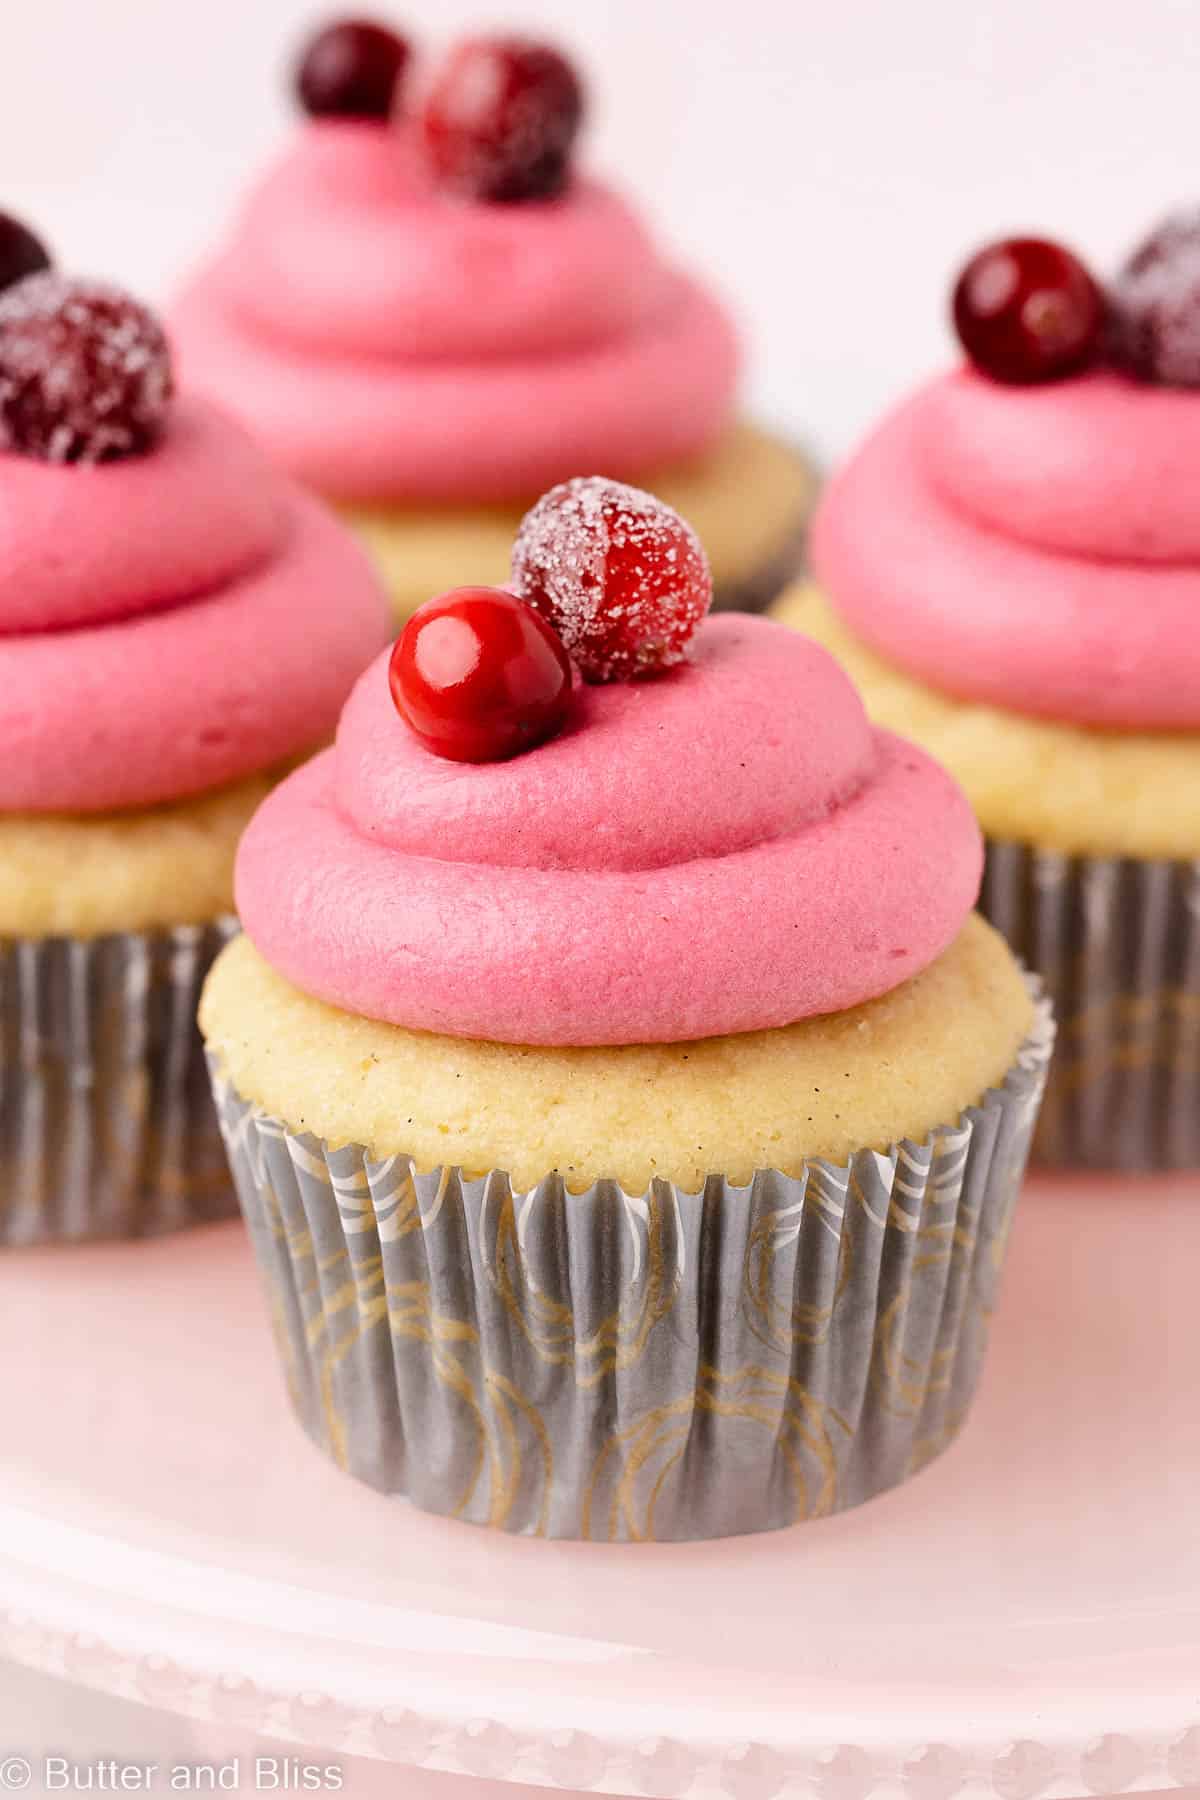 Pretty vanilla cupcakes frosted with holiday berry frosting.